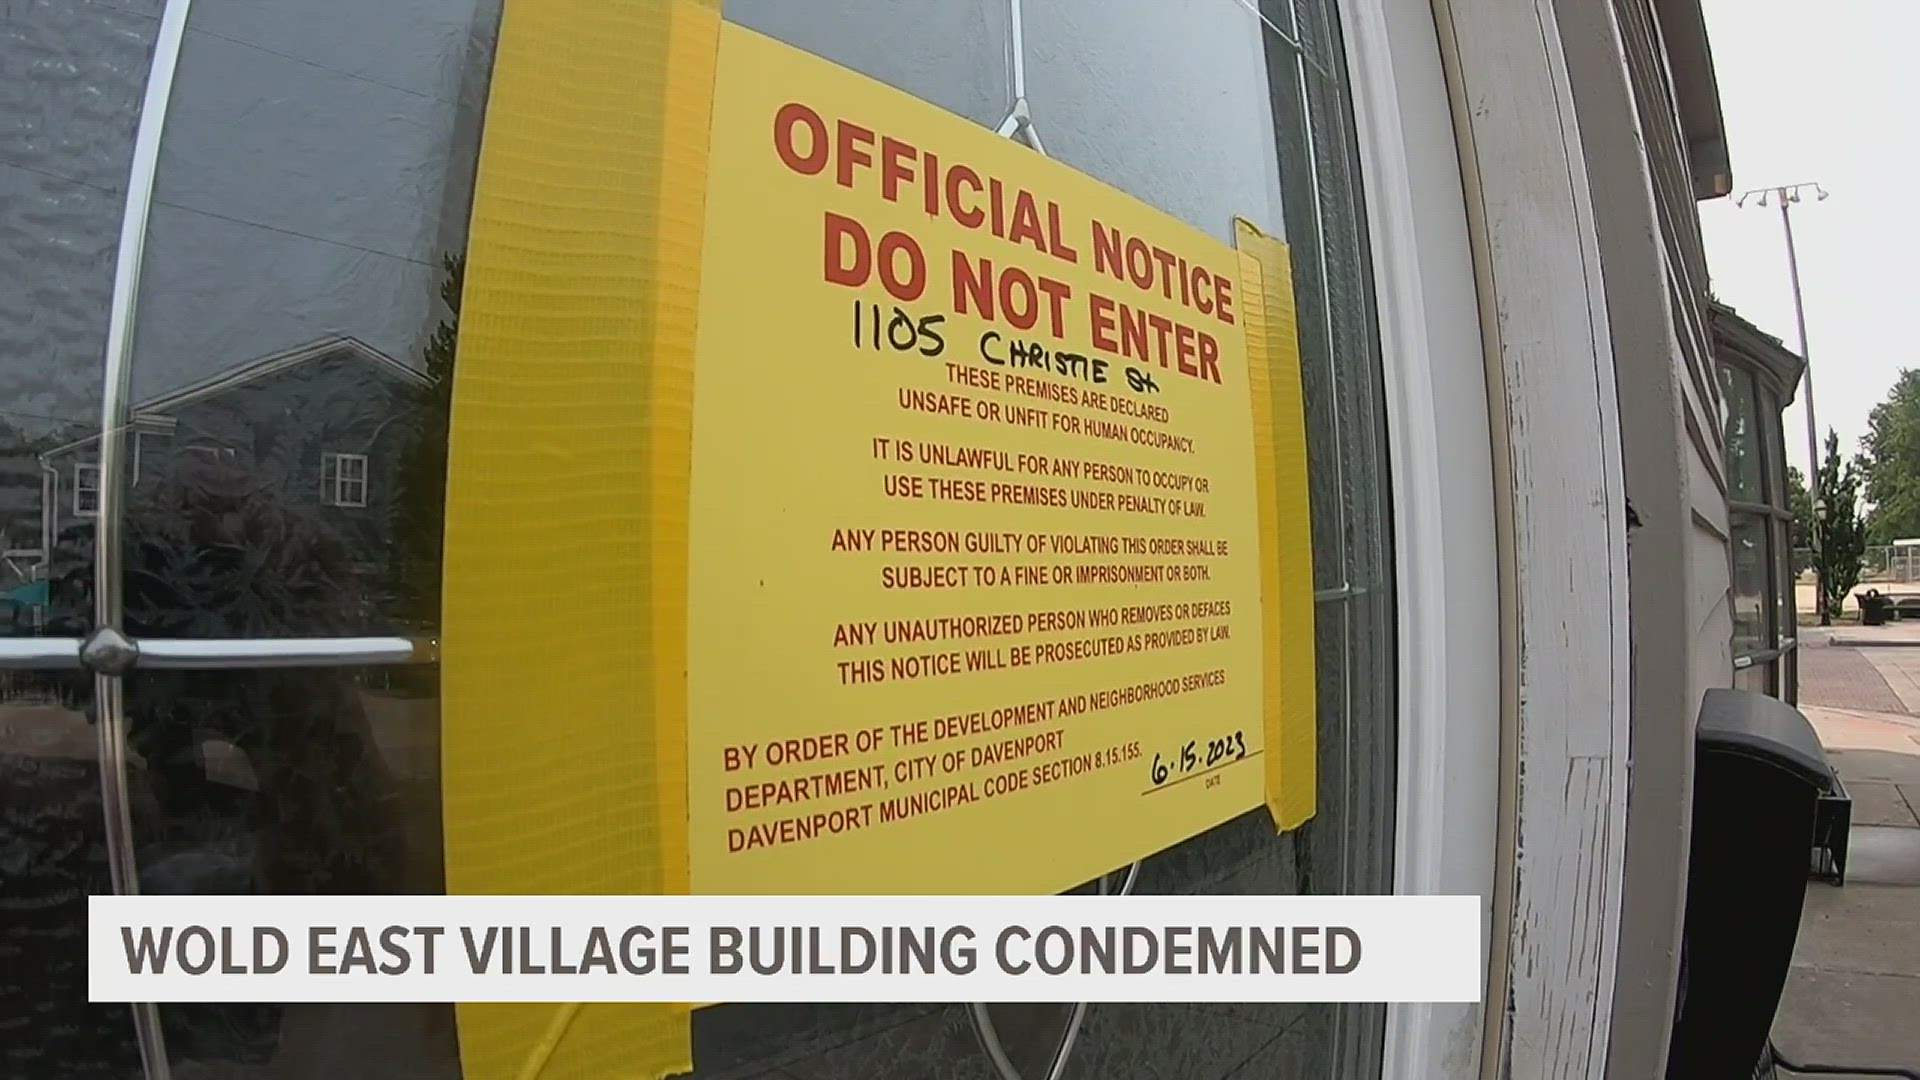 The building on 11th and Christie Street, run by the same owner of the collapsed building in downtown Davenport, is condemned just 10 days after News 8 covered it.